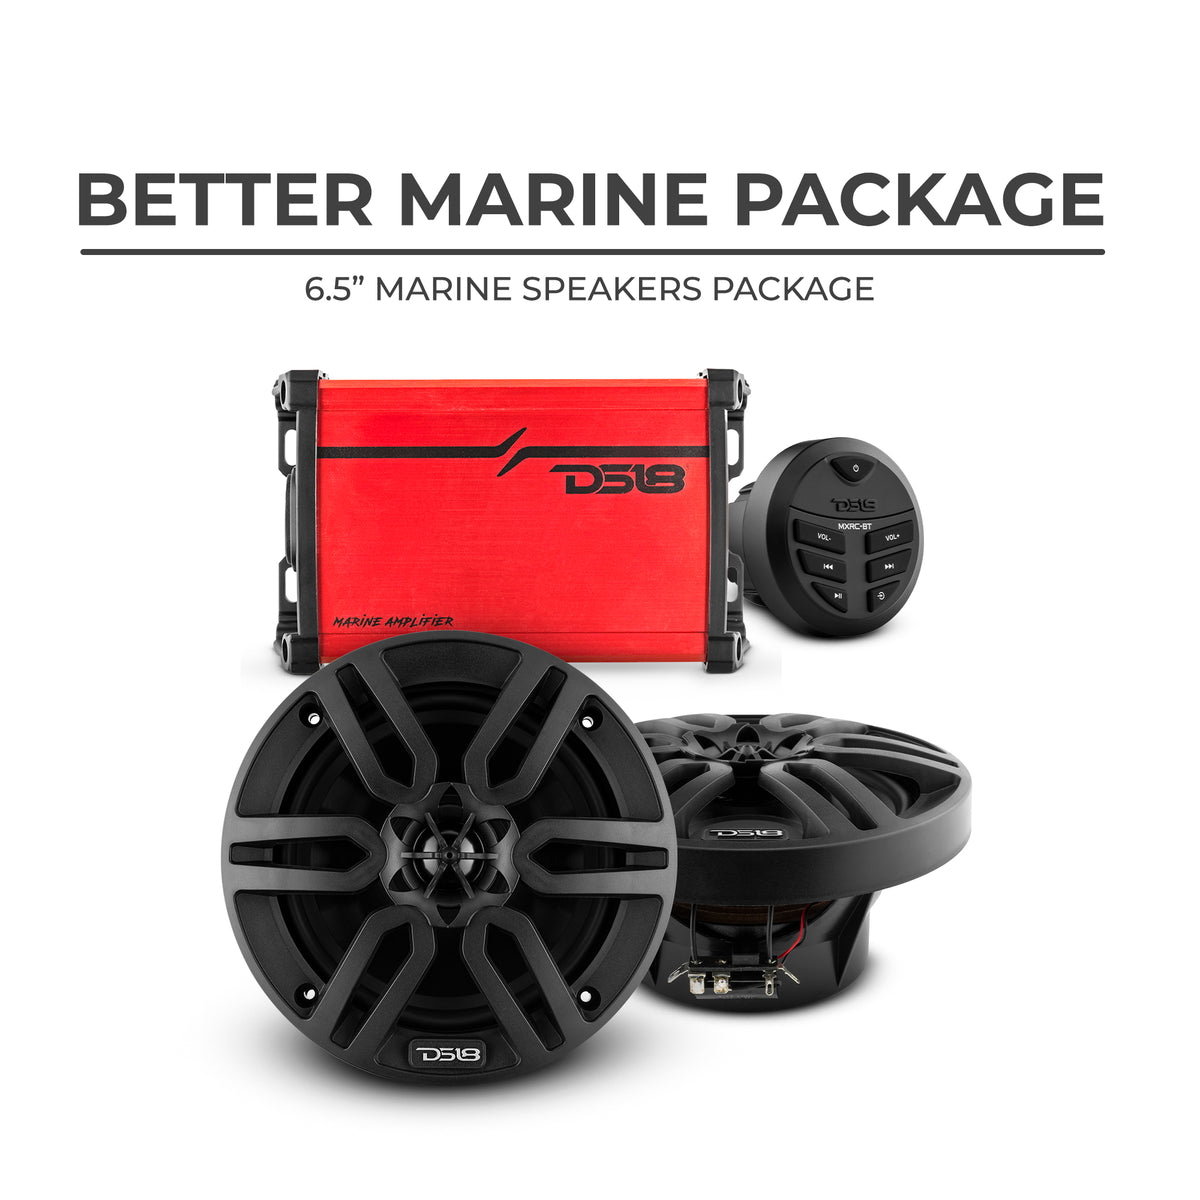 Better Marine Audio Package - 2 X 6.5" Speakers with Head Unit & 4 Channel Amplifier